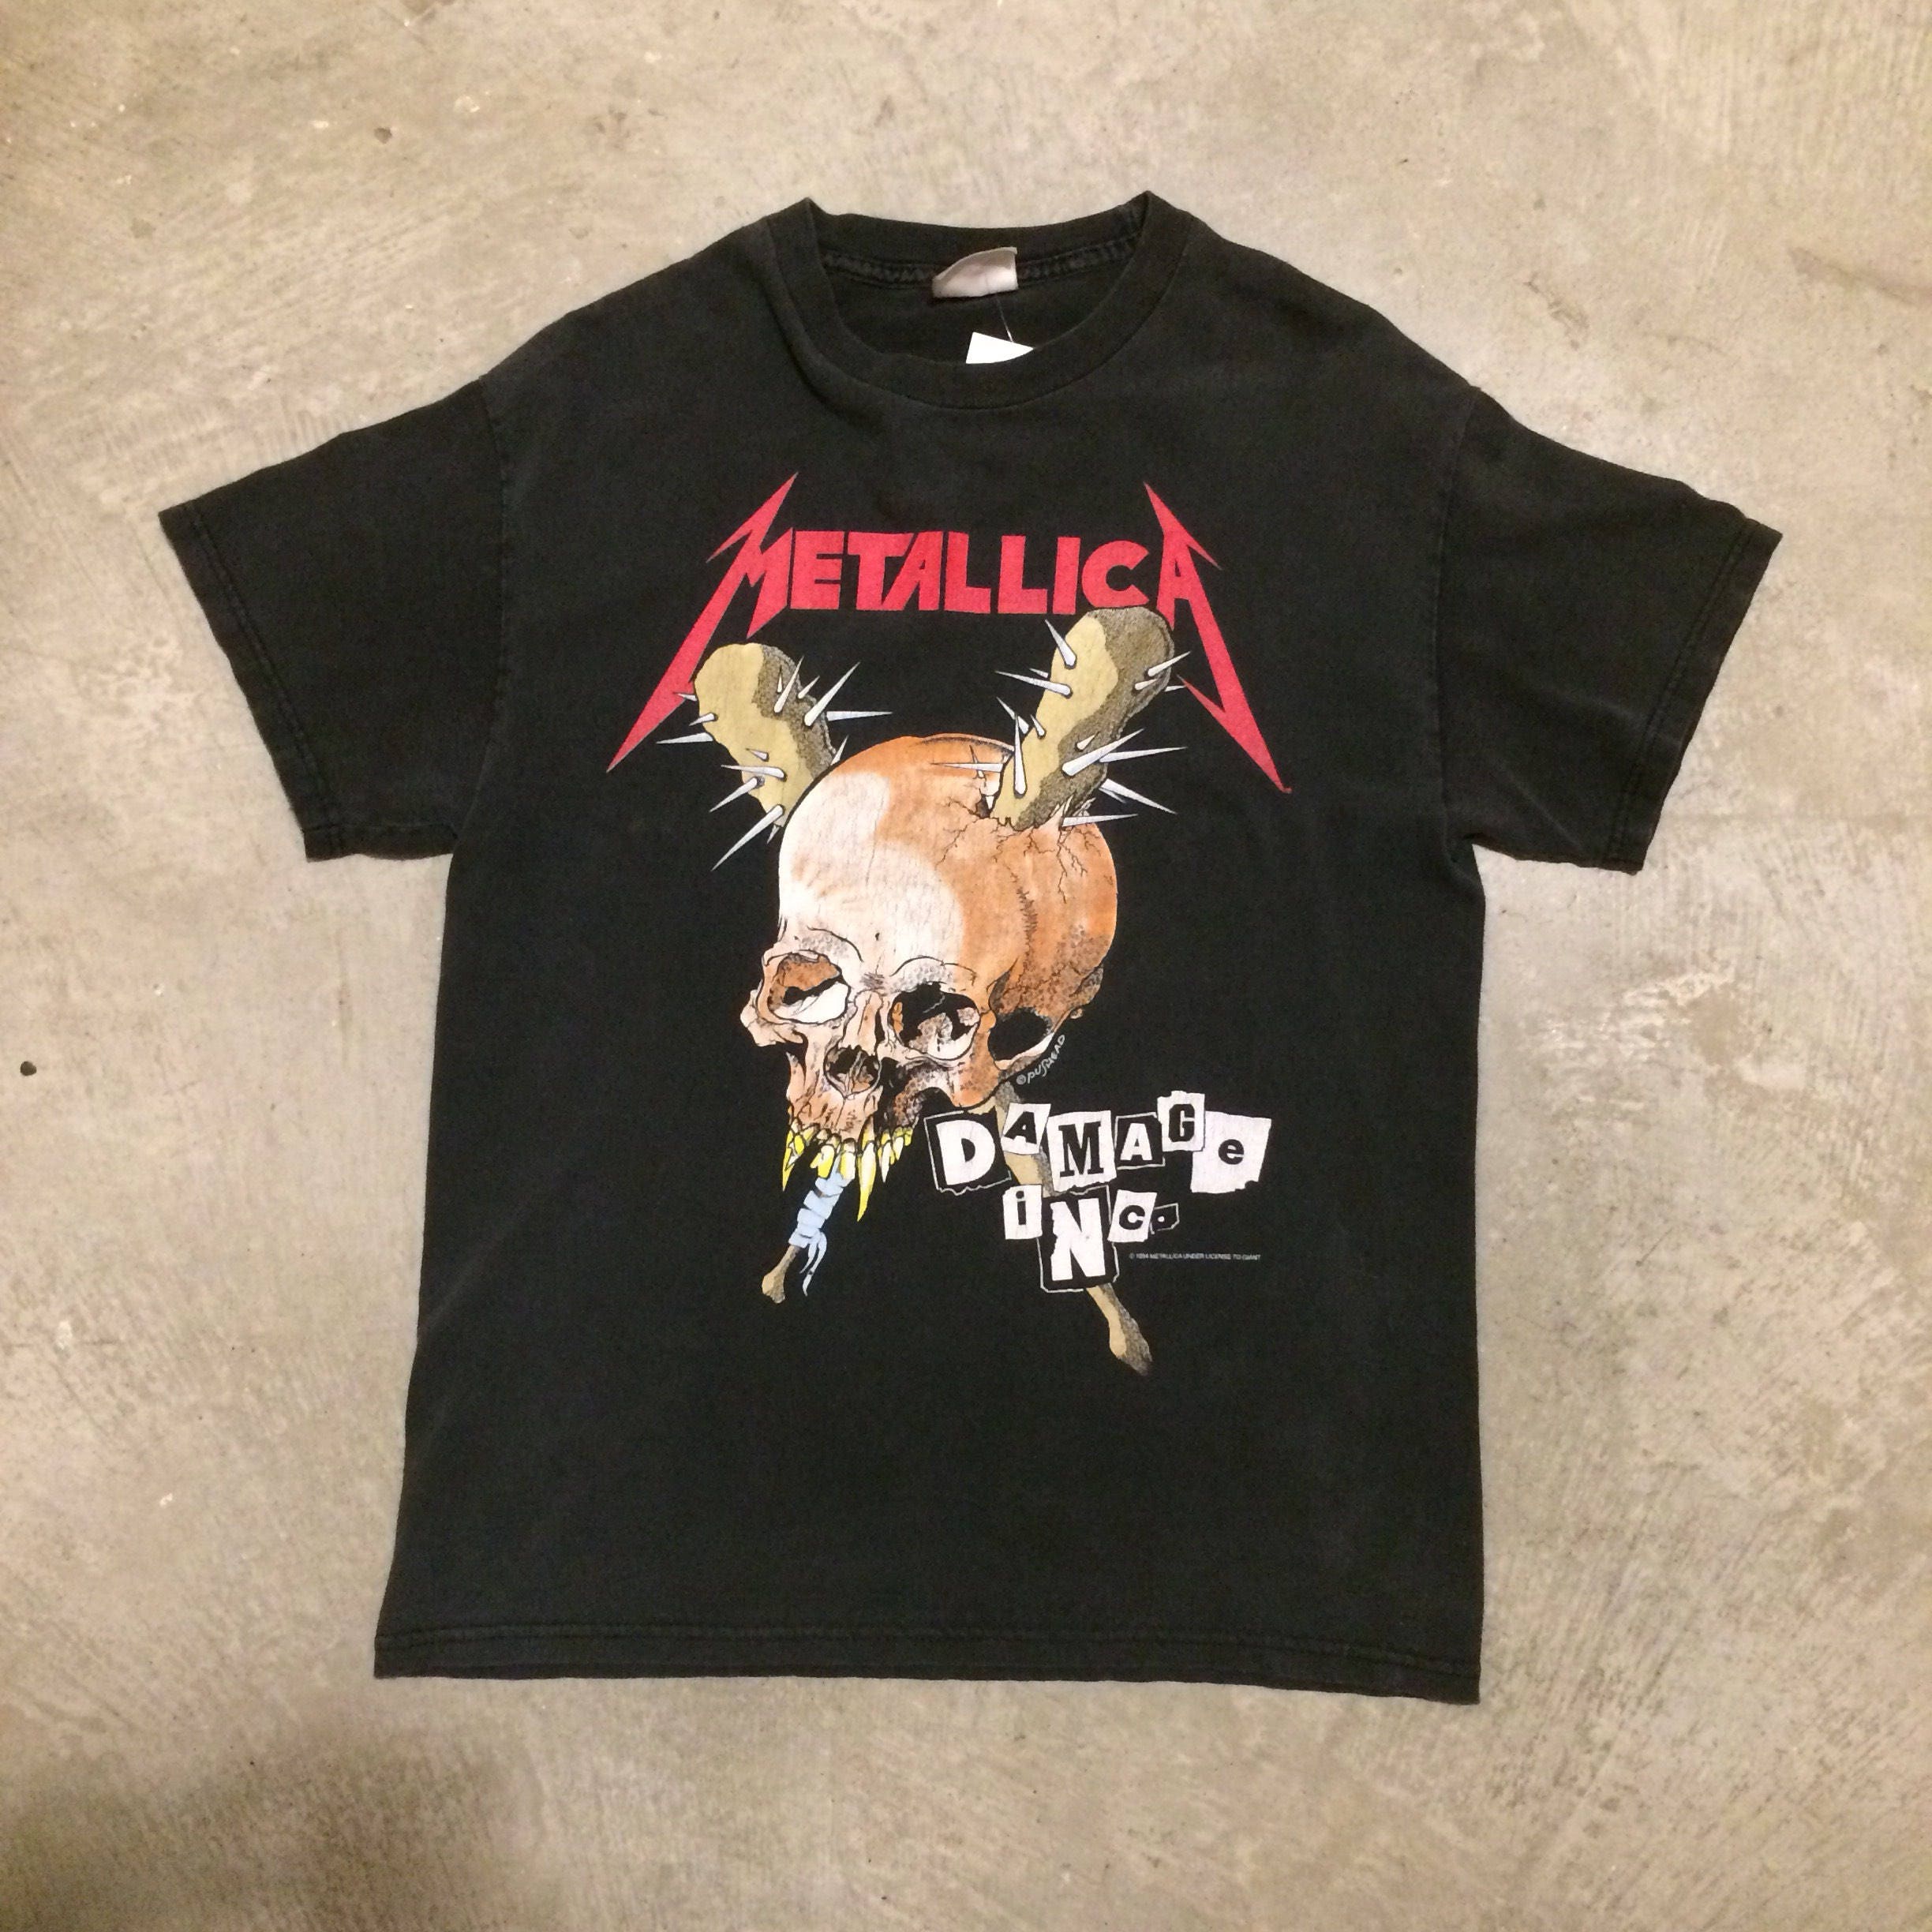 Metallica Shirt Etsy Toffee Art - how do you make t shirts on roblox toffee art